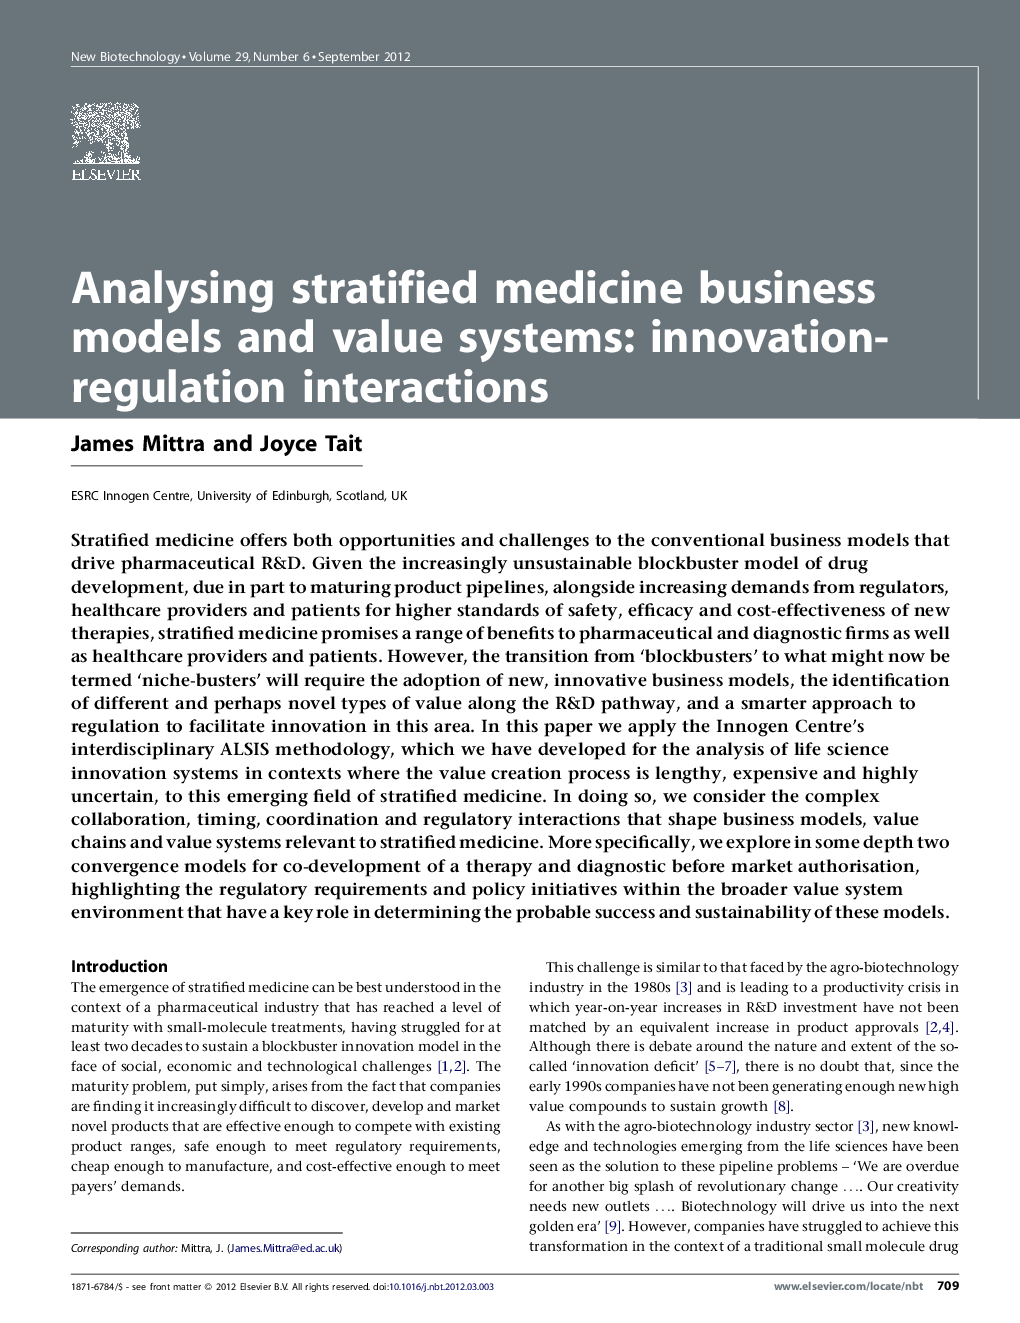 Analysing stratified medicine business models and value systems: innovation-regulation interactions